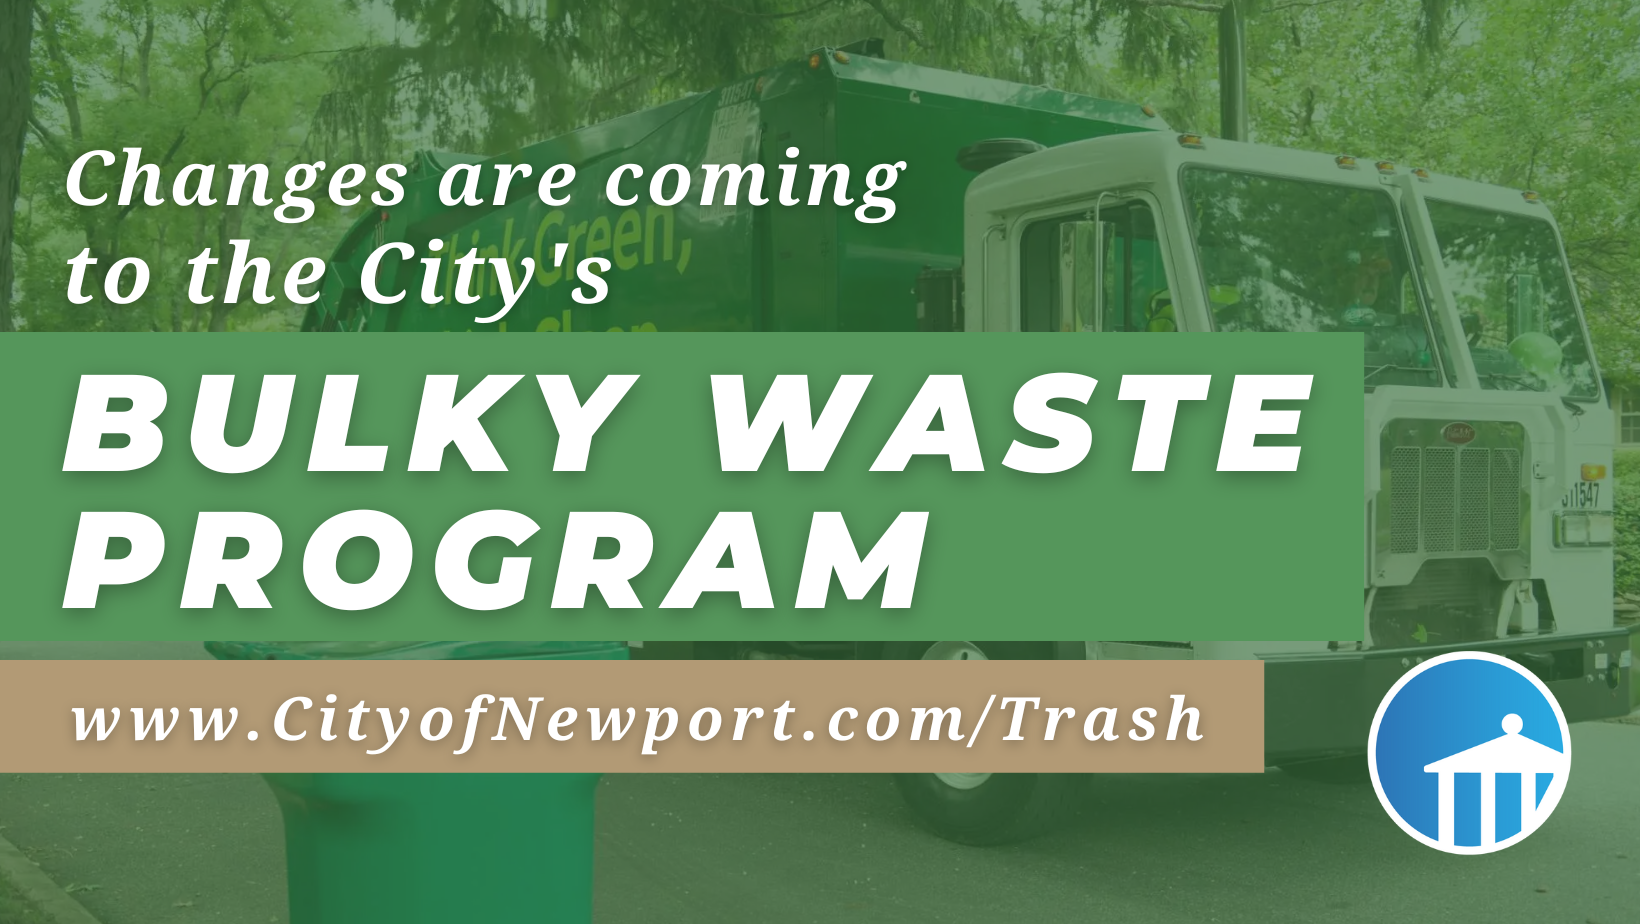 Here's How to Schedule a Bulky Waste Pickup!